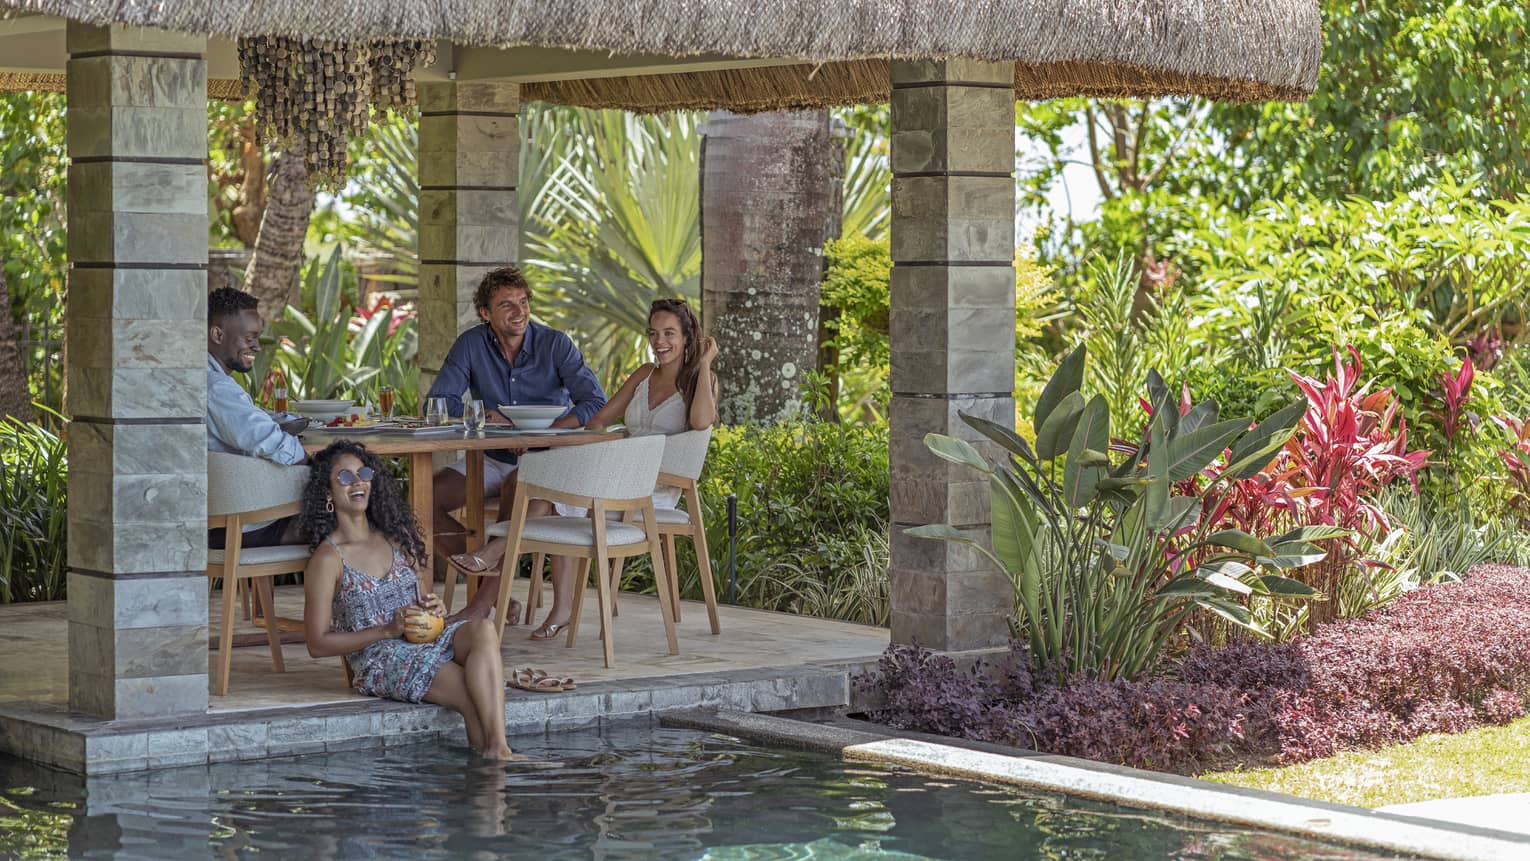 Four people sit at dining table under thatched-roof patio, next to pool